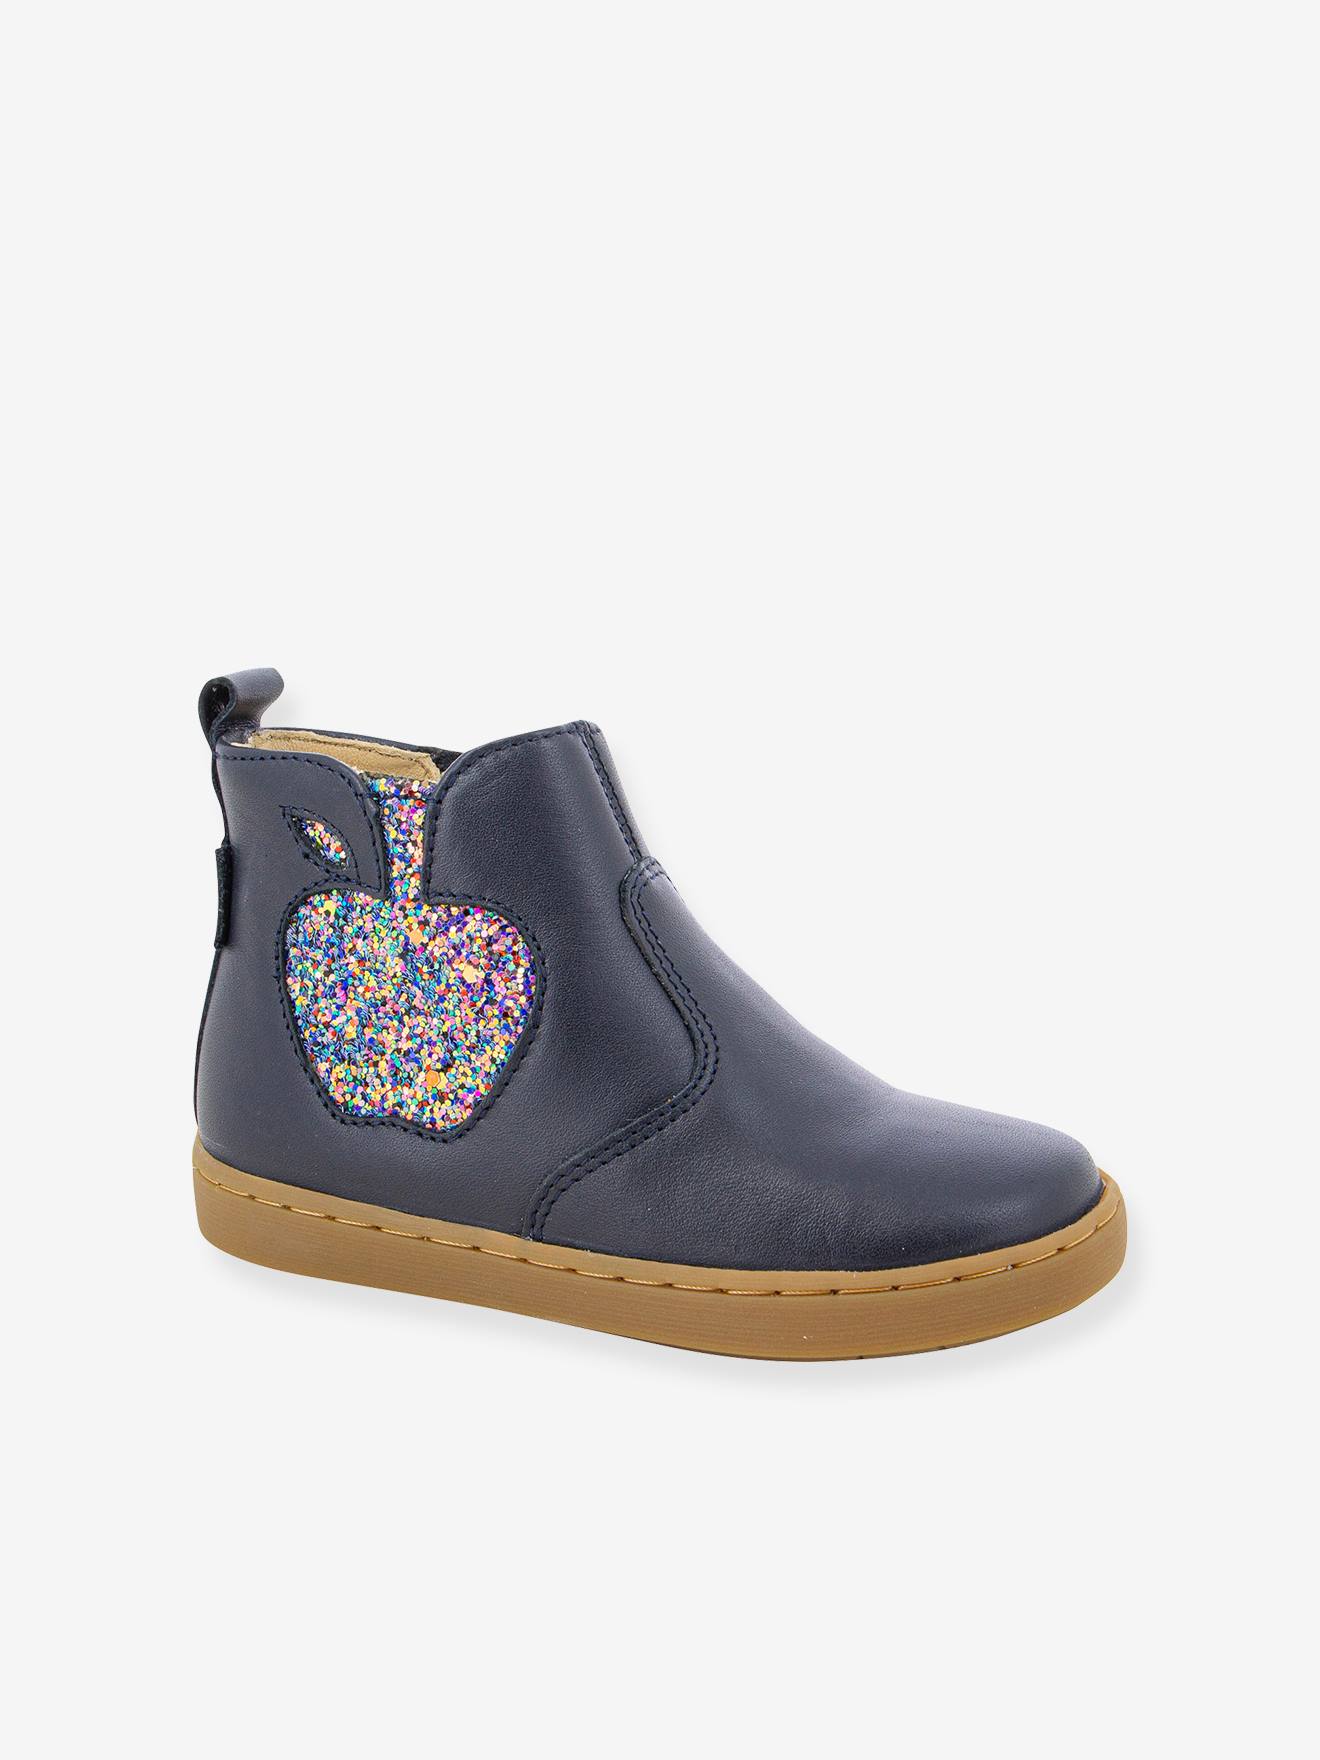 Play New Apple Boots for Babies, by SHOO POM(r) navy blue